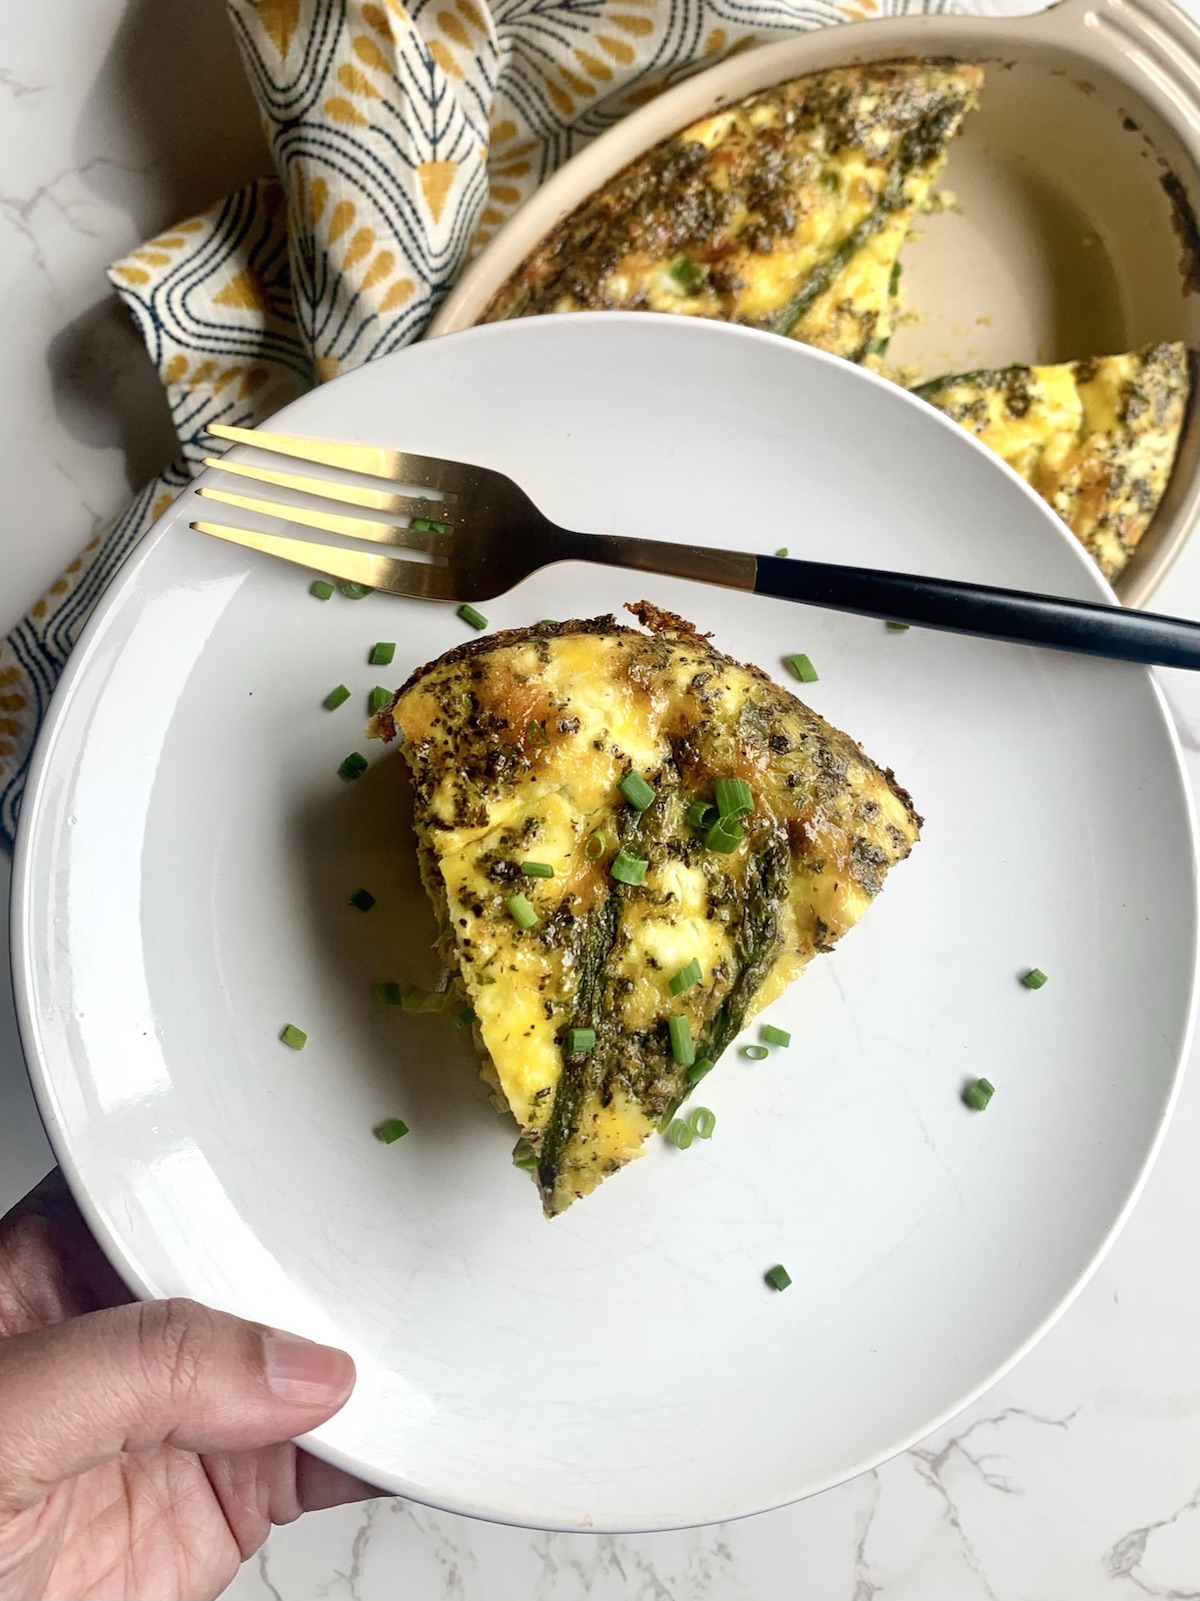 Hand holding a slice of baked asparagus, leek and goat cheese frittata on a white plate with a gold fork